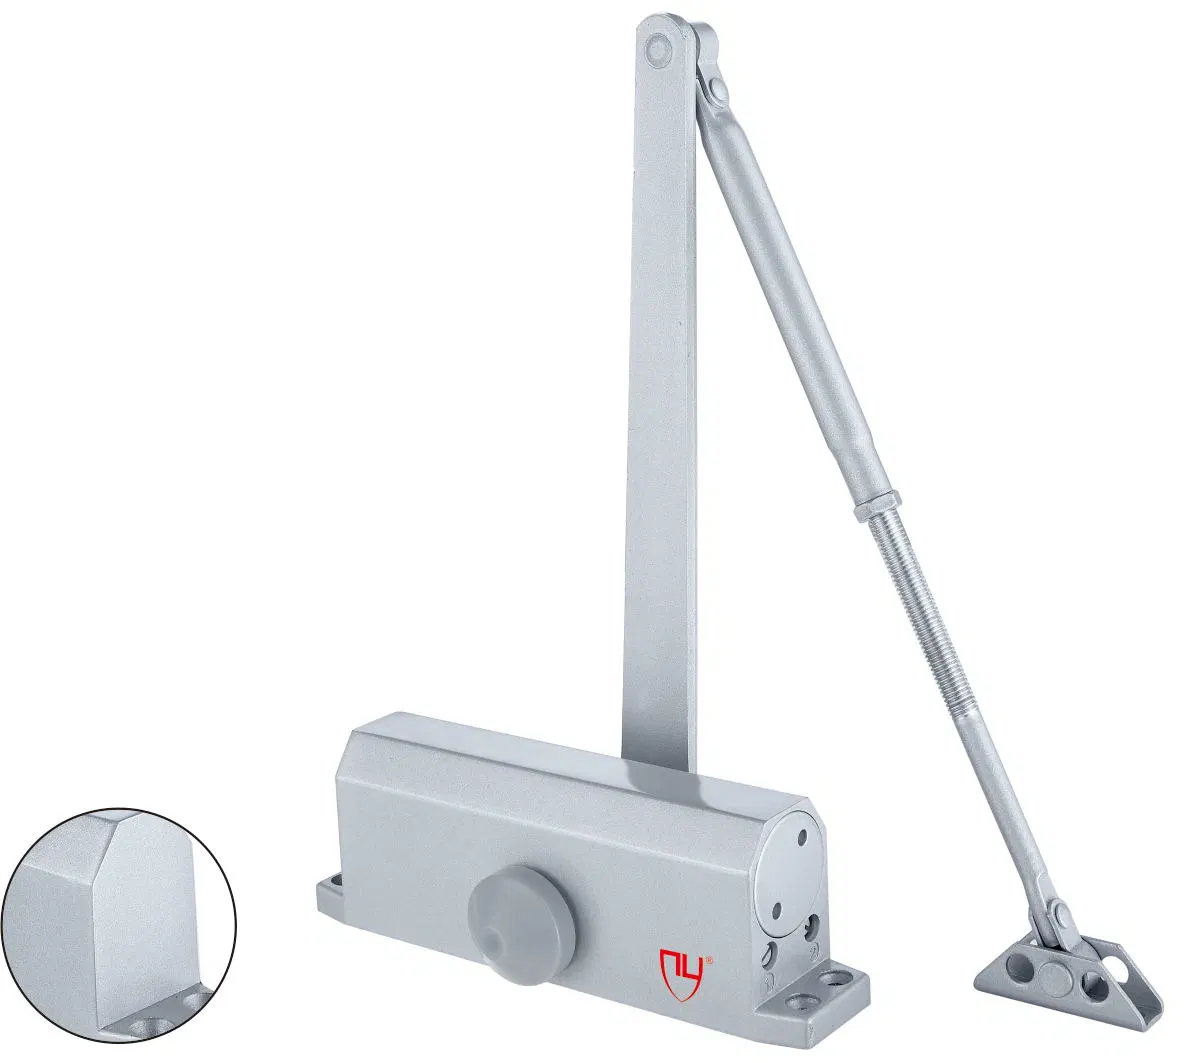 Adjustable Aluminium Door Closer From China Supplier-Guangdong Chuanying Hardware-N0. Cy-072 Discount